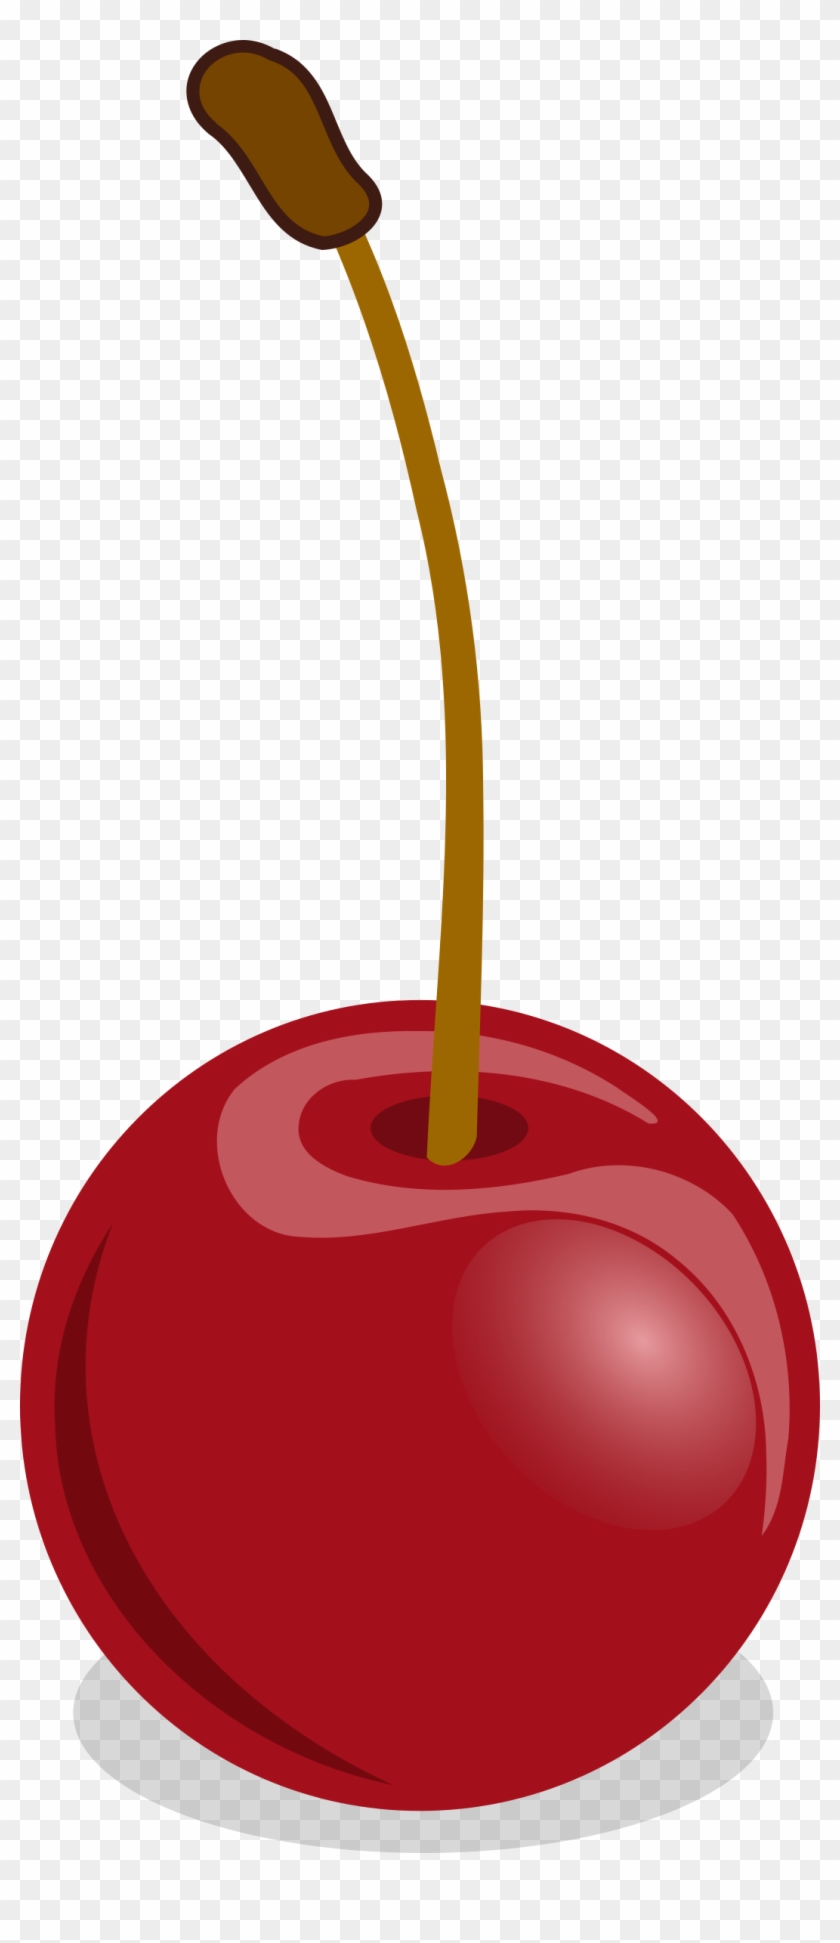 A Shiny, Delicious-looking Cherry - Cherry Clip Art #203089